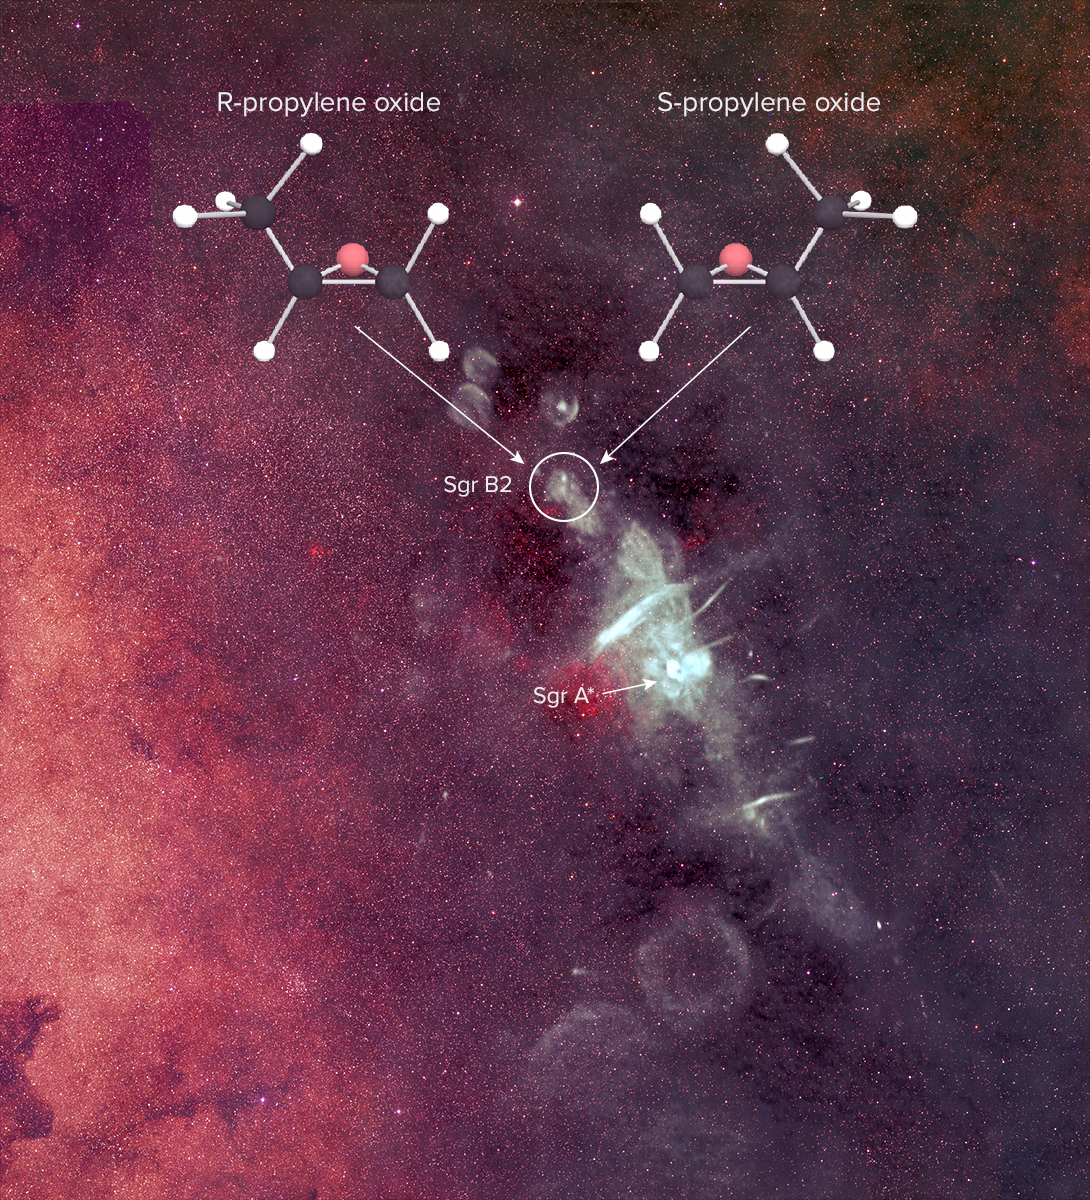 Asymmetric molecule, key to life, detected in space for first time